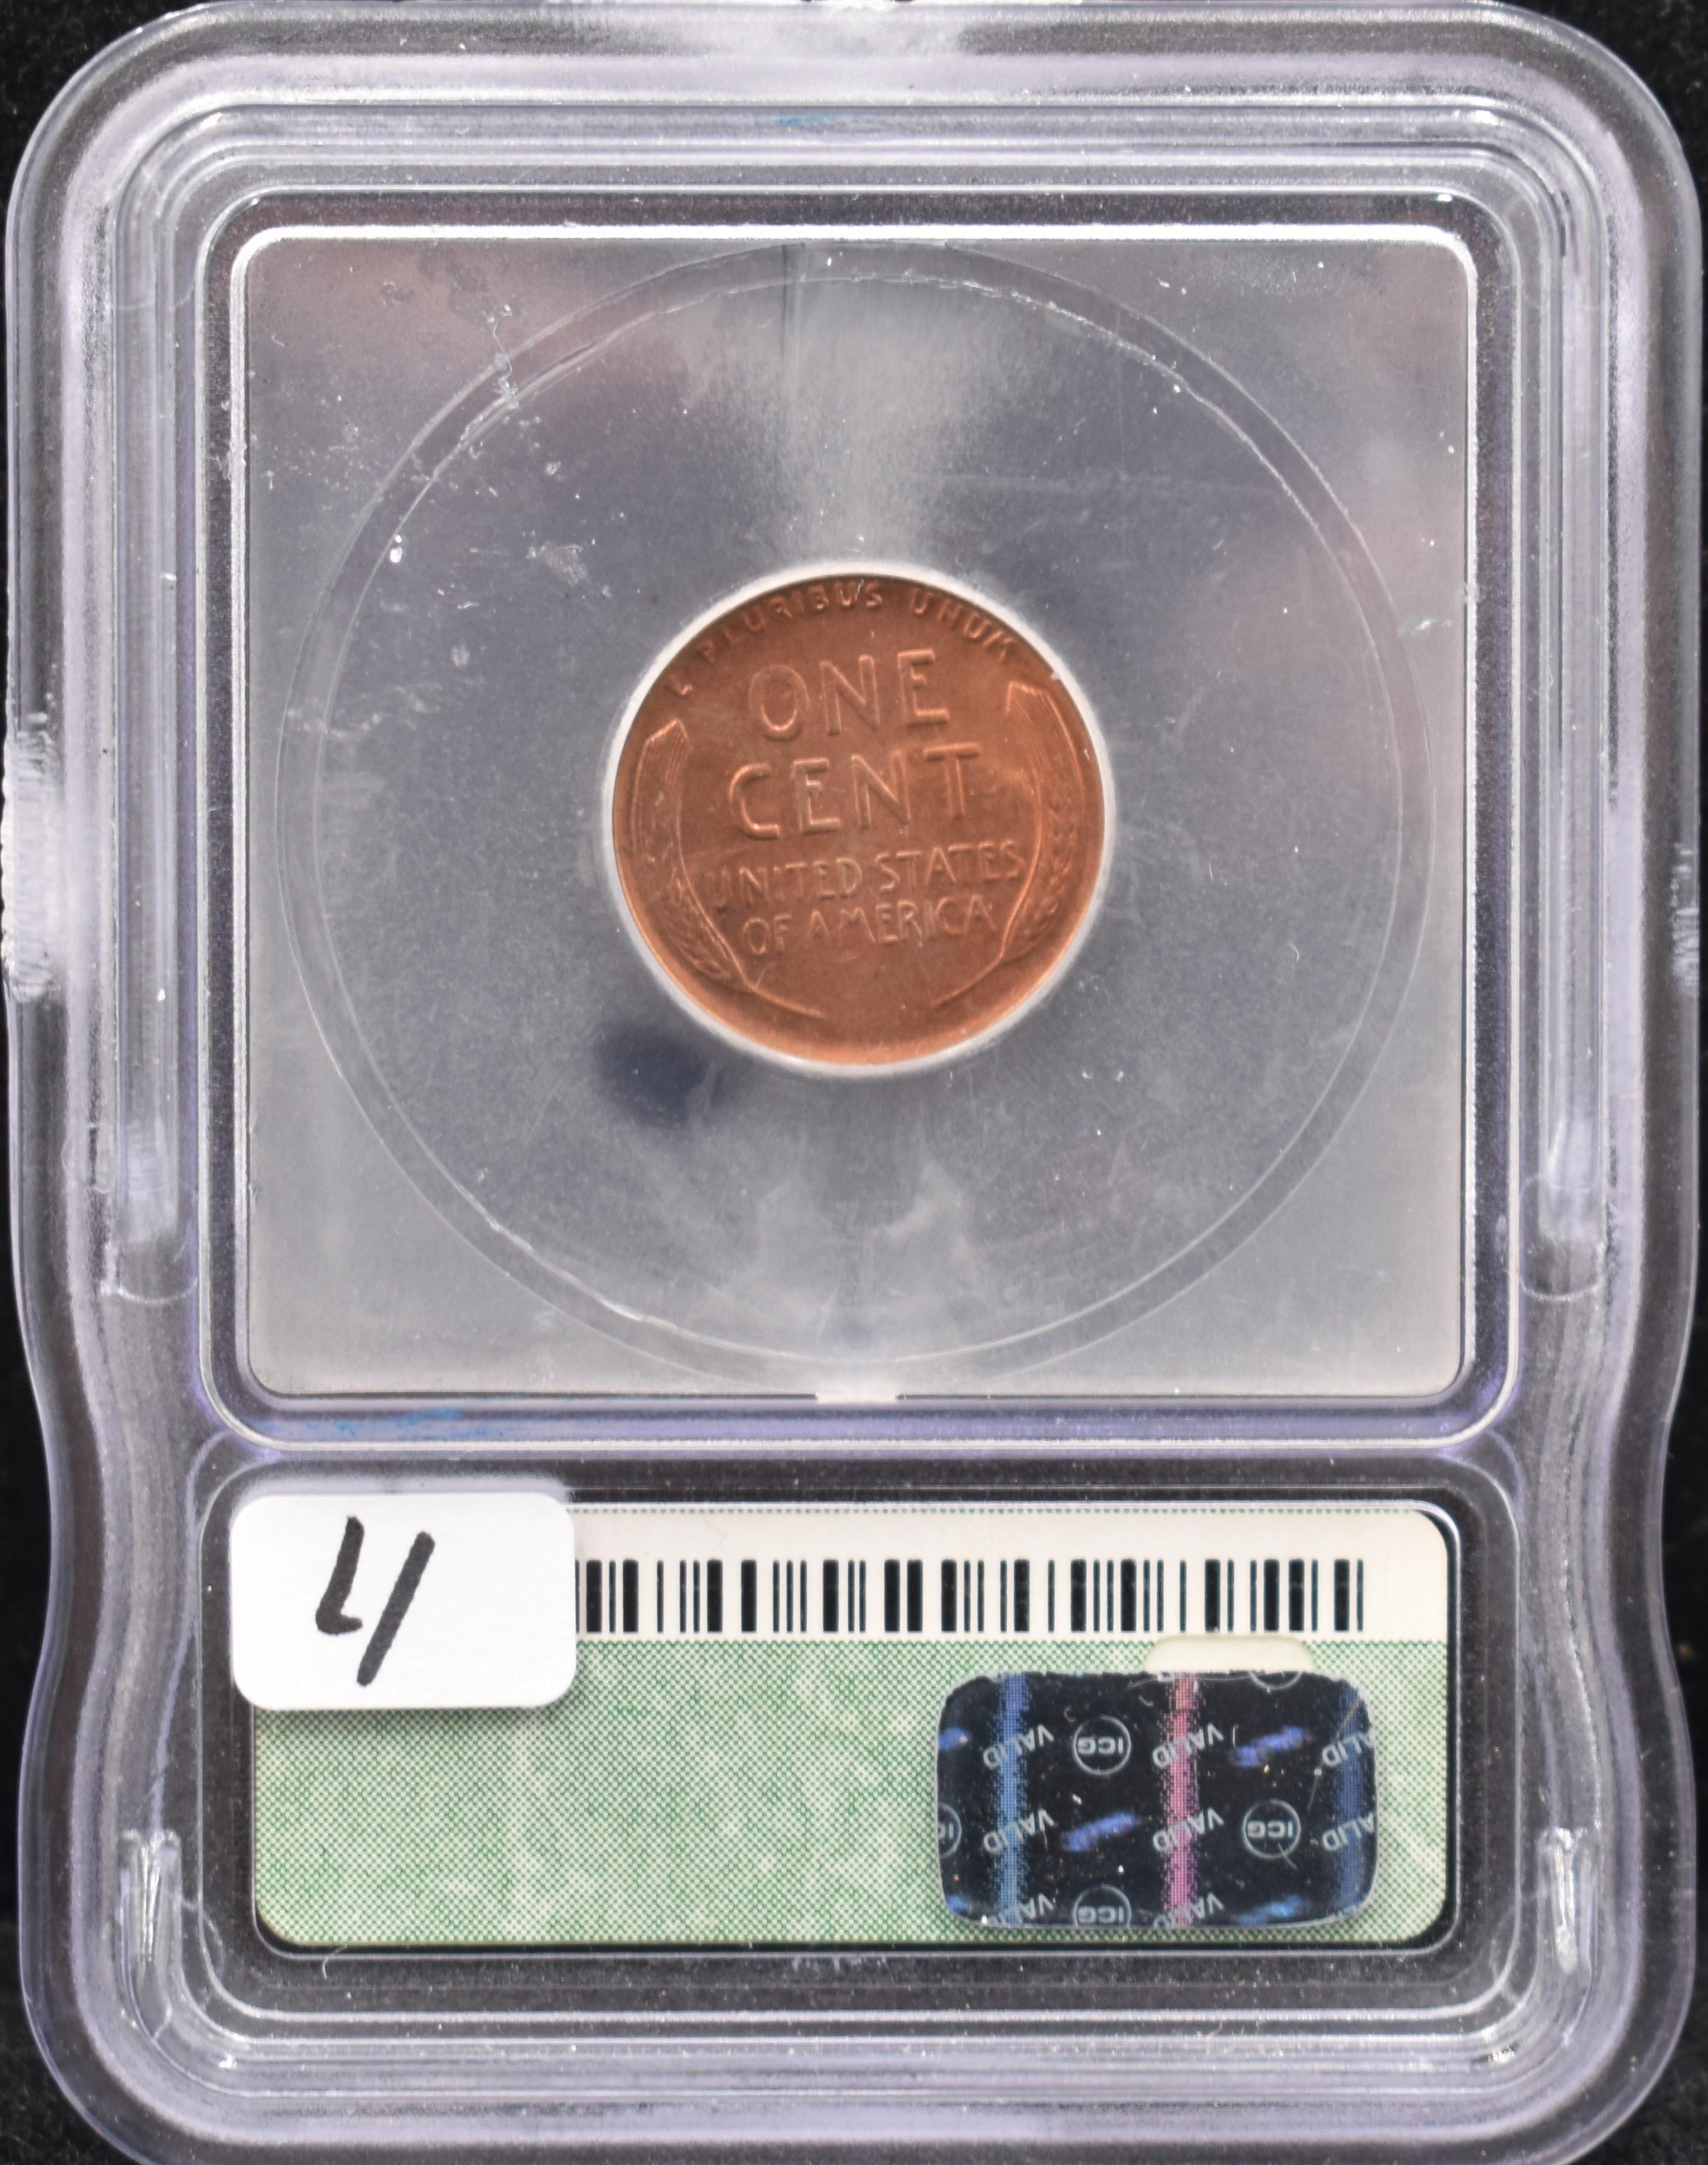 1935-S LINCOLN WHEAT PENNY ICG MS66 RD